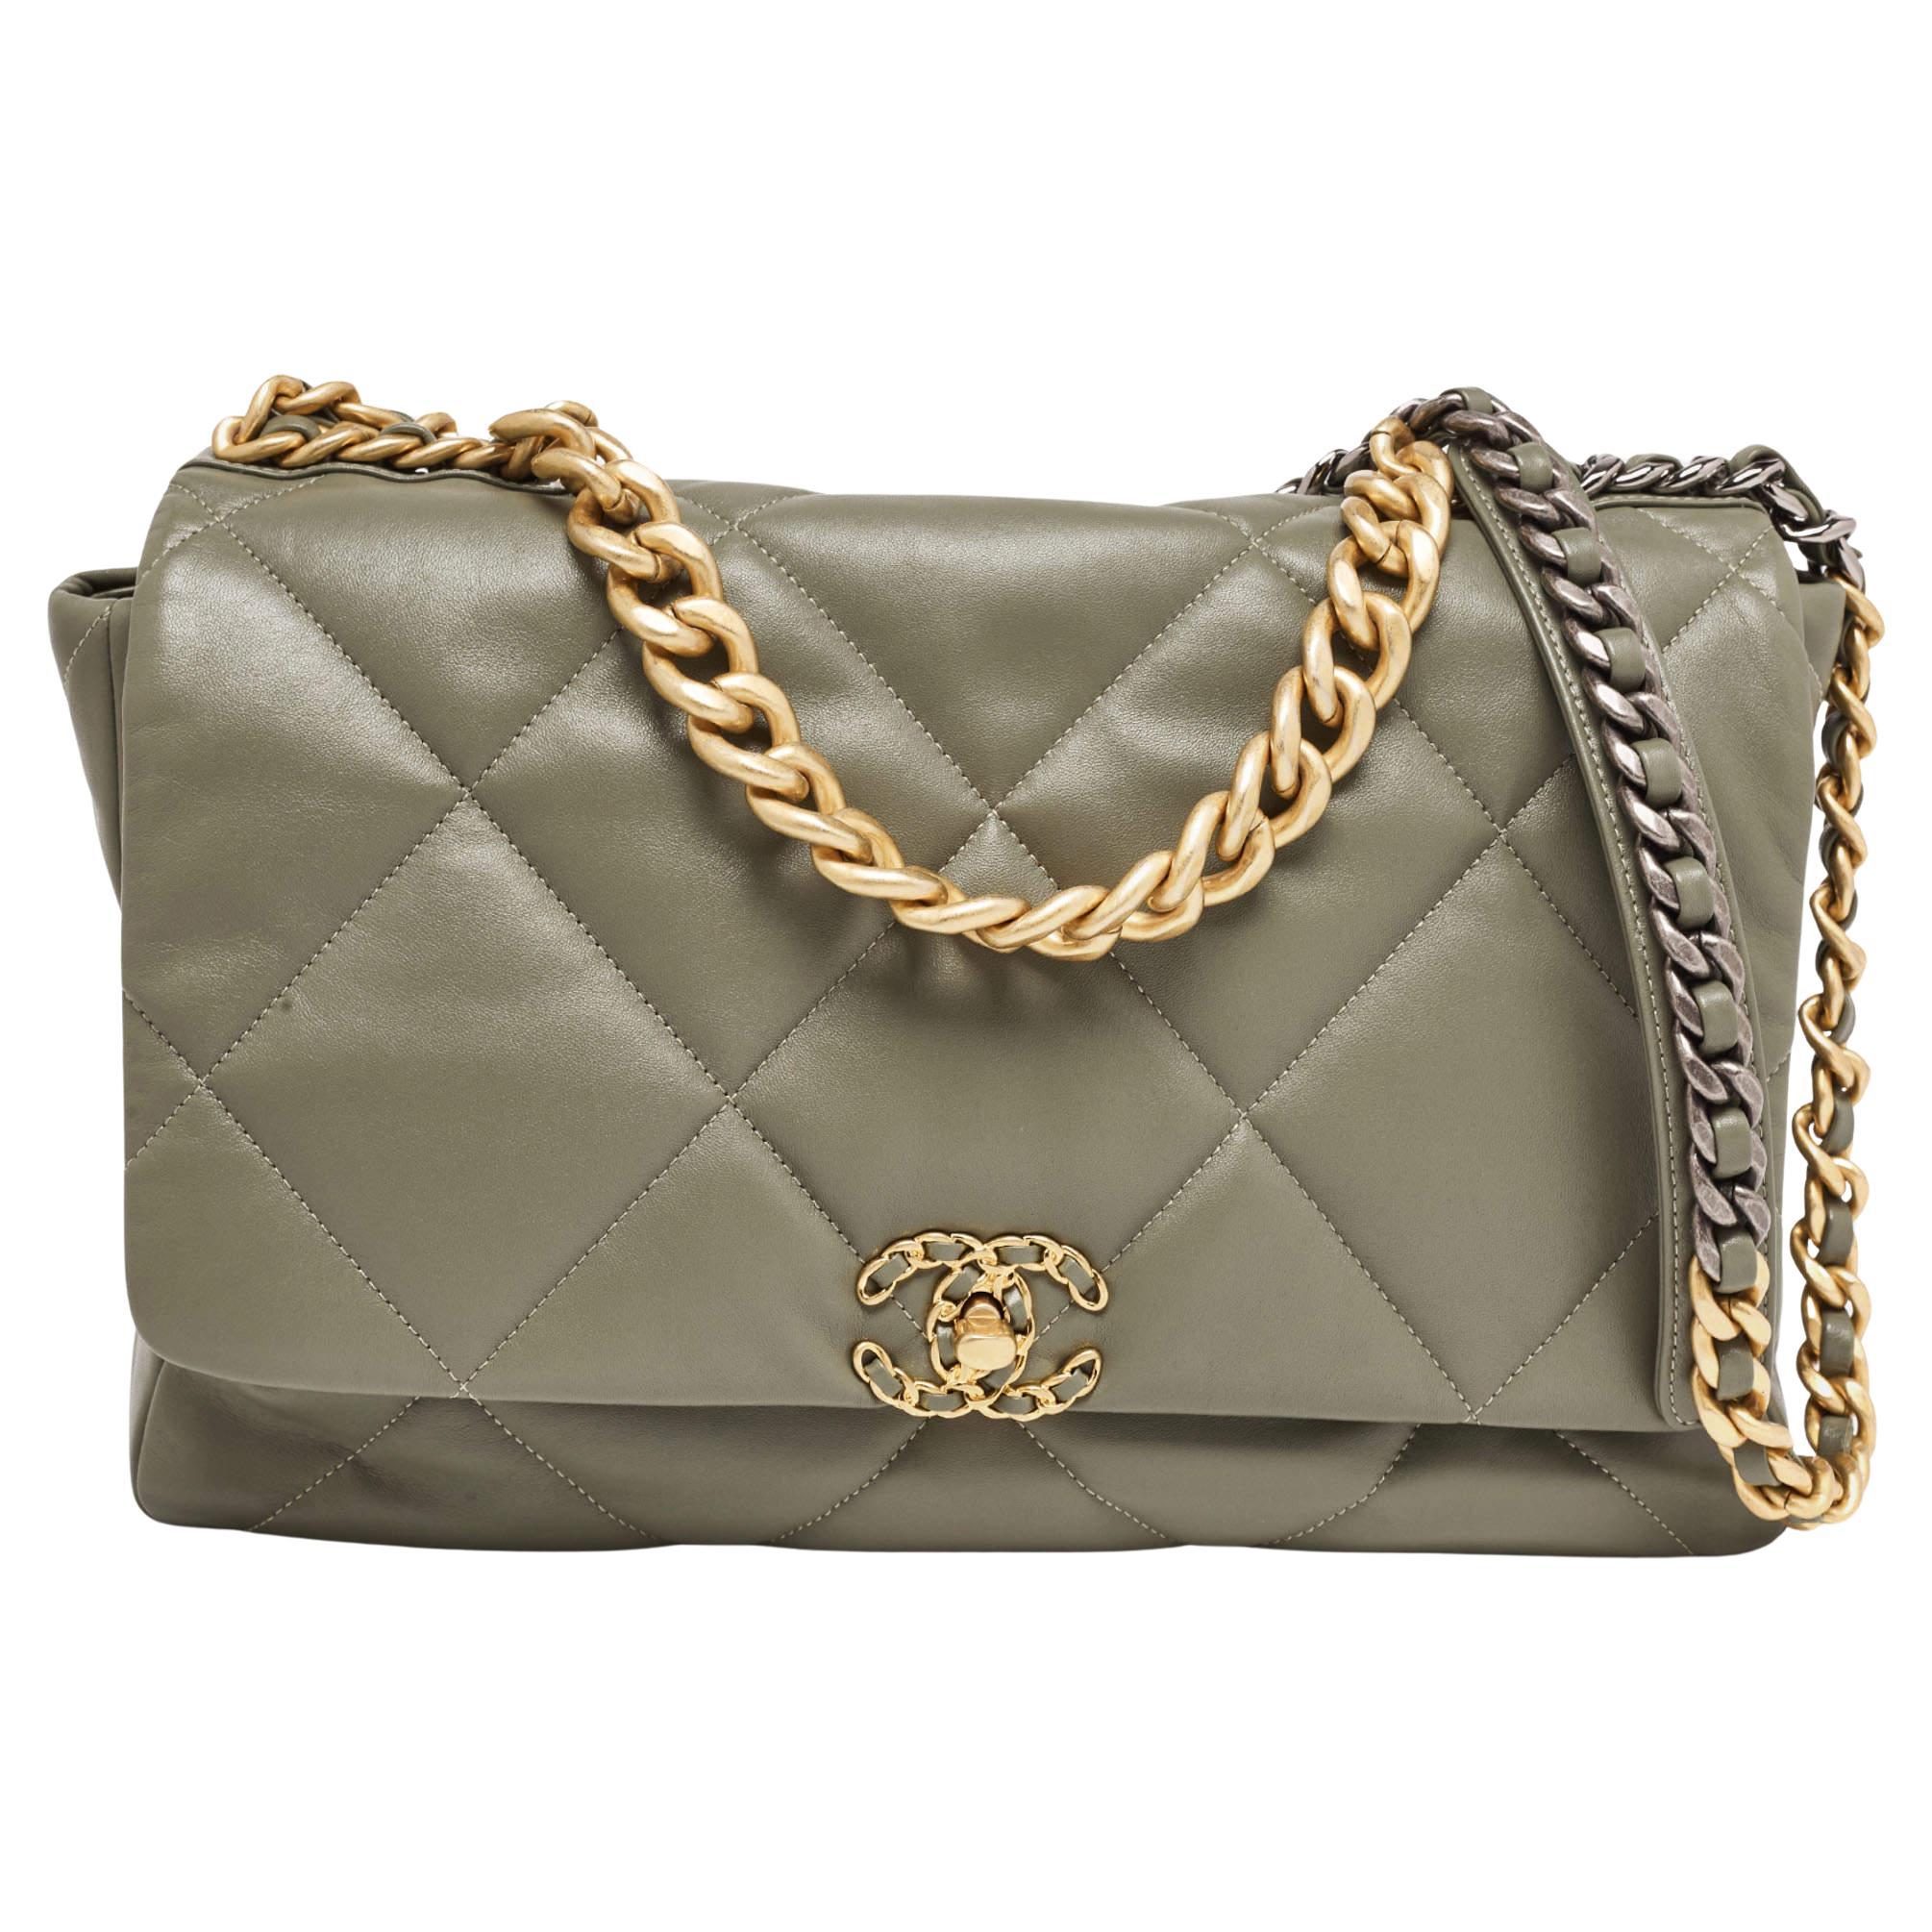 Chanel Fatigue Green Quilted Leather Maxi 19 Shoulder Bag